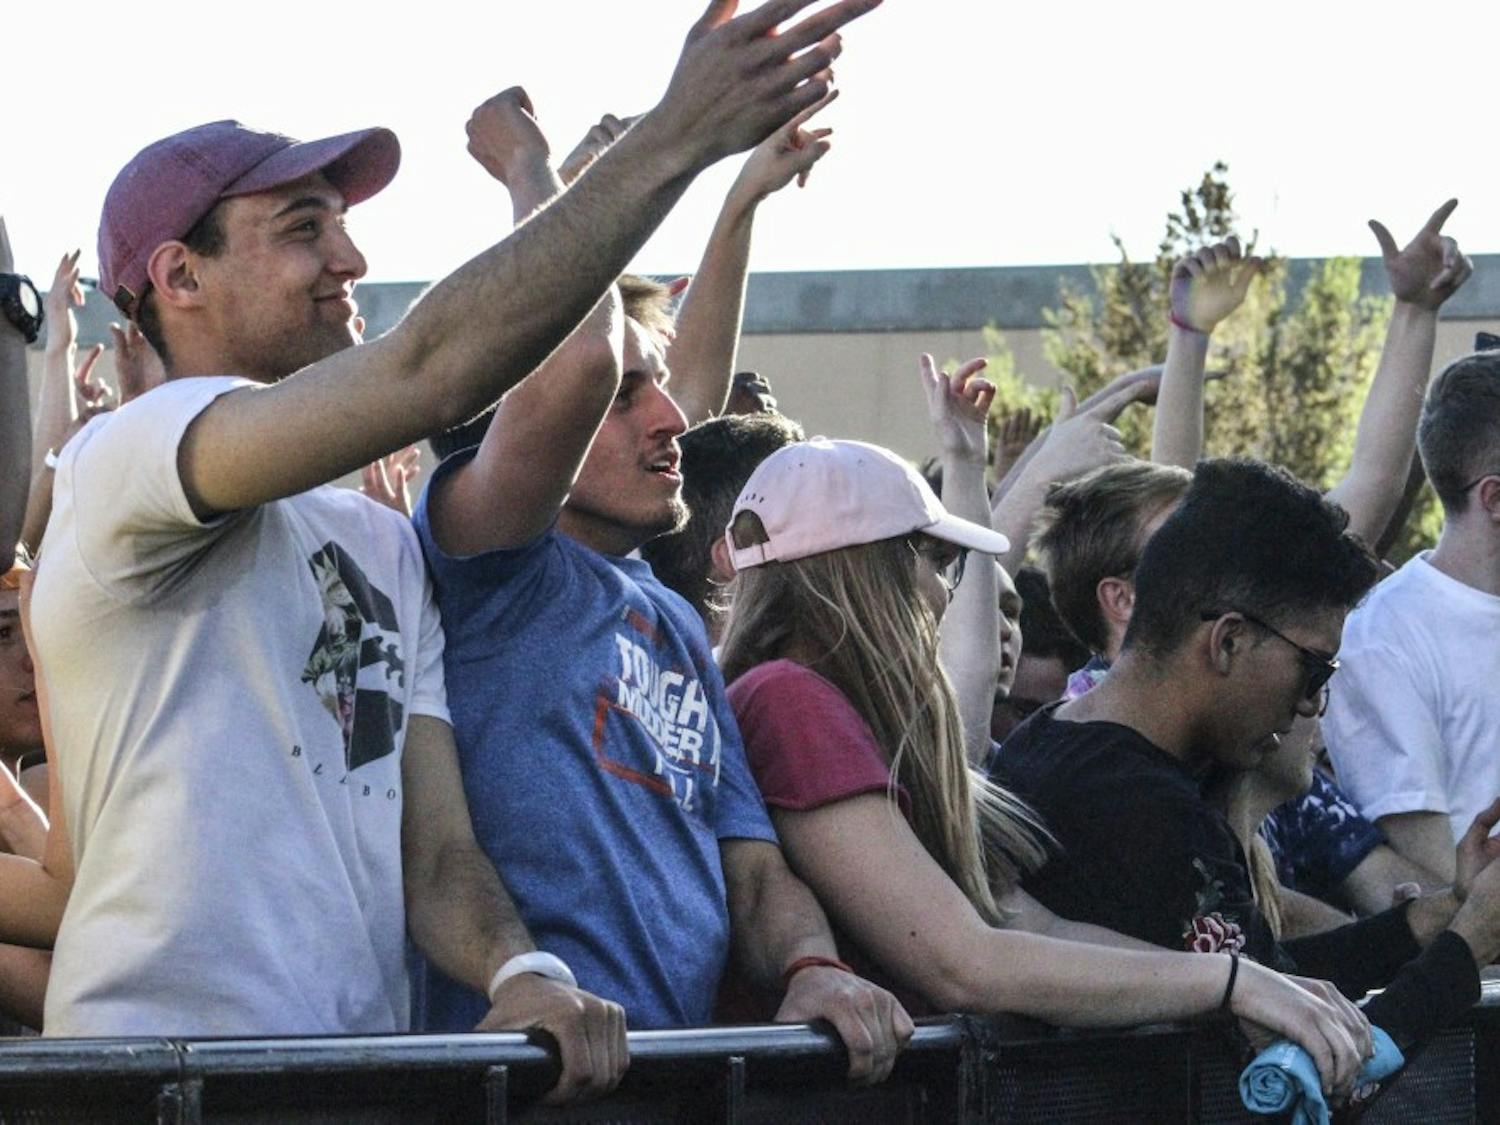 A crowd of attendees enjoys Fiestas on&nbsp;Johnson Field&nbsp;on April 8, 2018. The 10-act lineup included&nbsp;Hippie Sabotage, Quinn XCII and more.